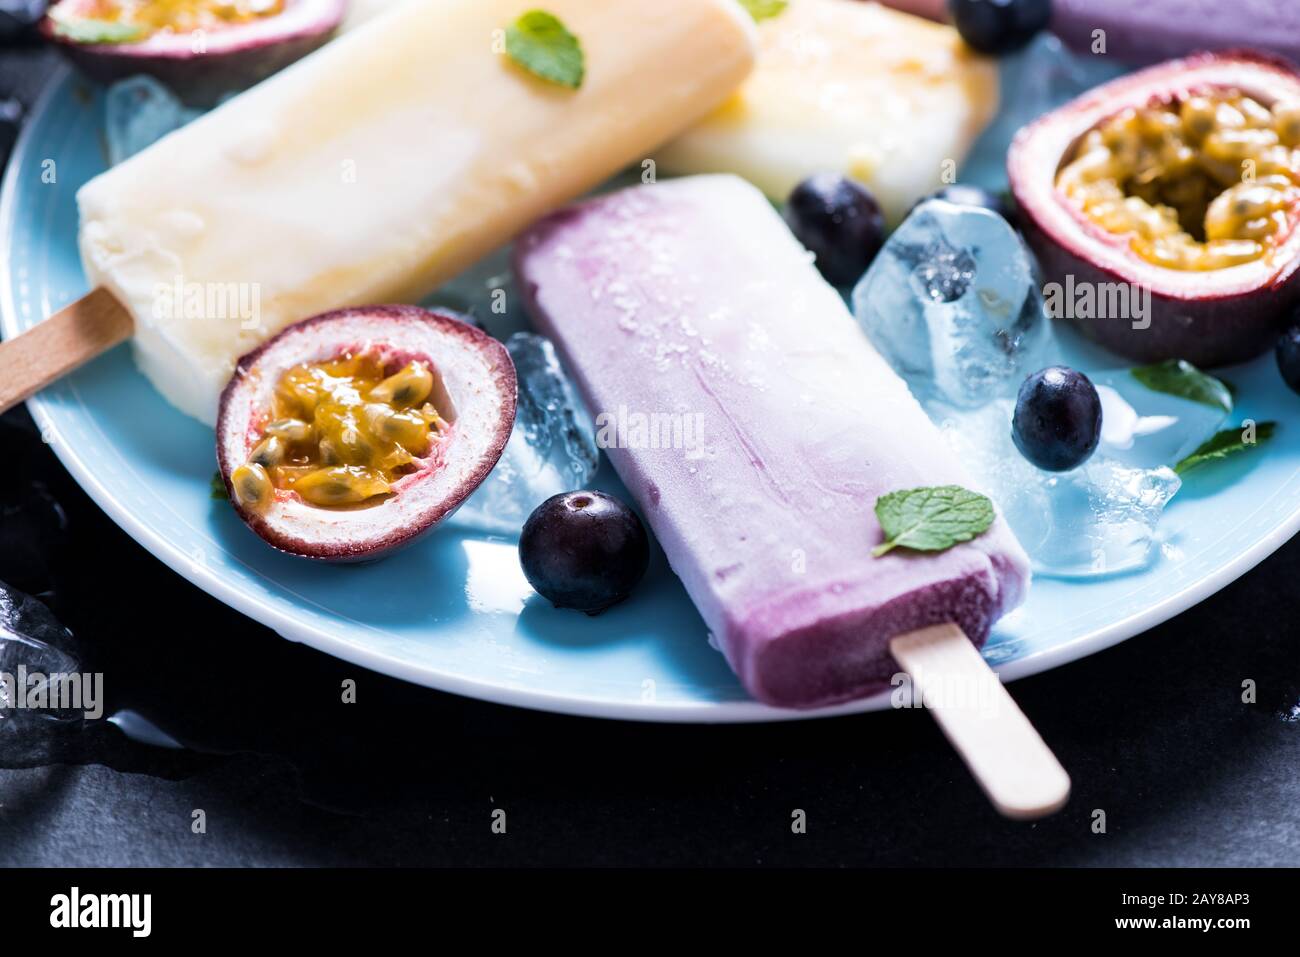 Healthy refreshing snack, fruity popsicle Stock Photo